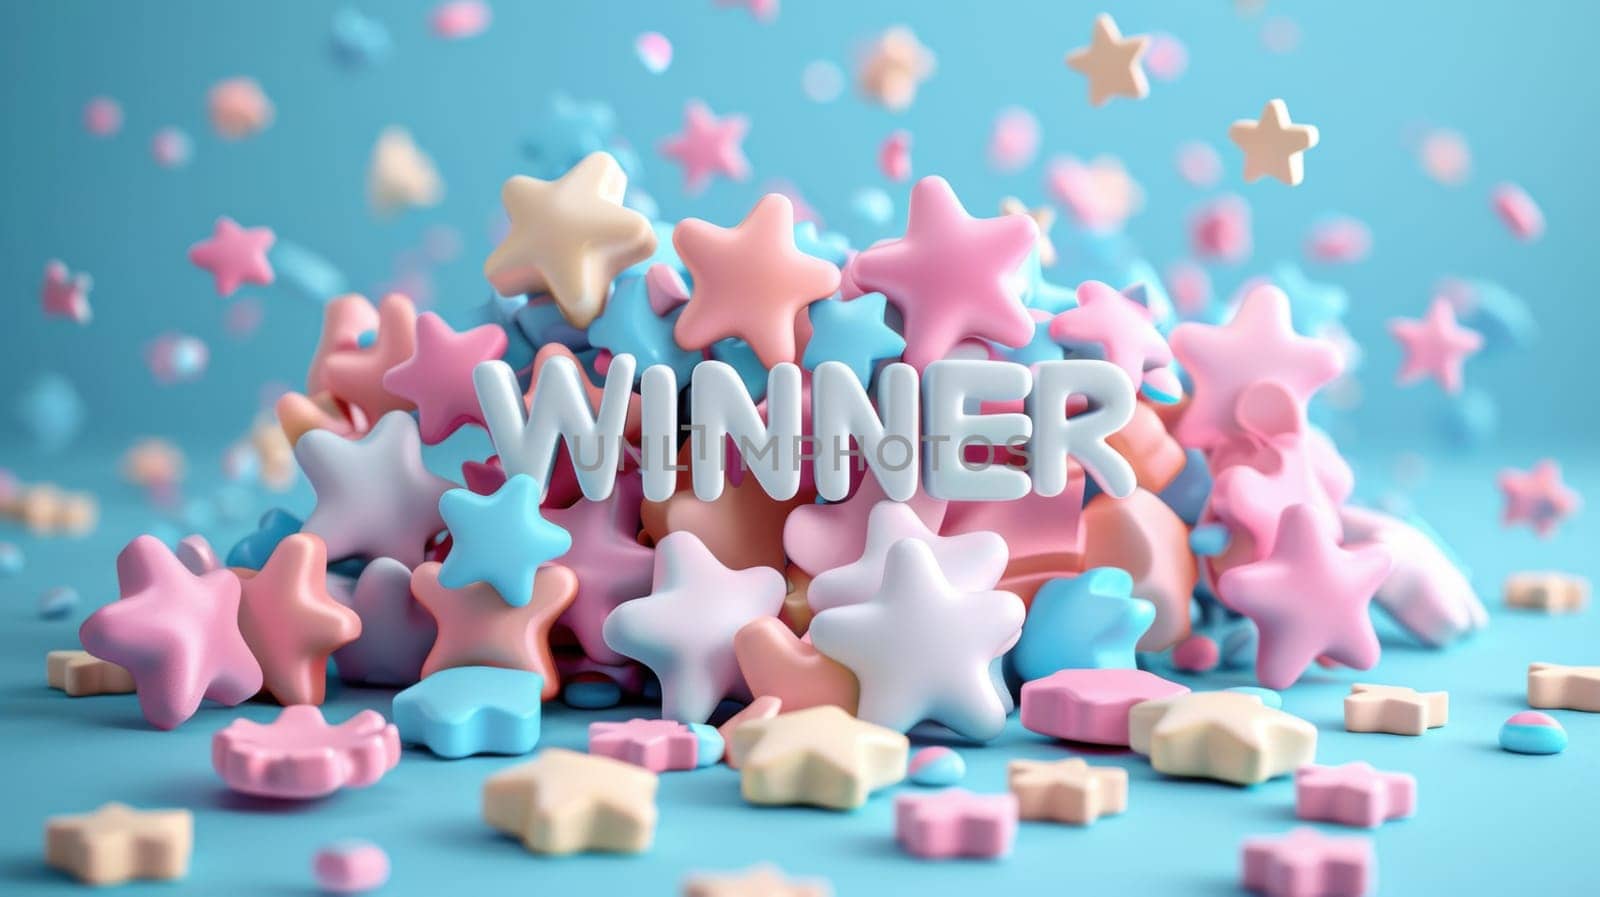 The Word WINNER in White Letters Surrounded by a Burst of Colorful Stars in 3D Concept Celebration and Achievement.